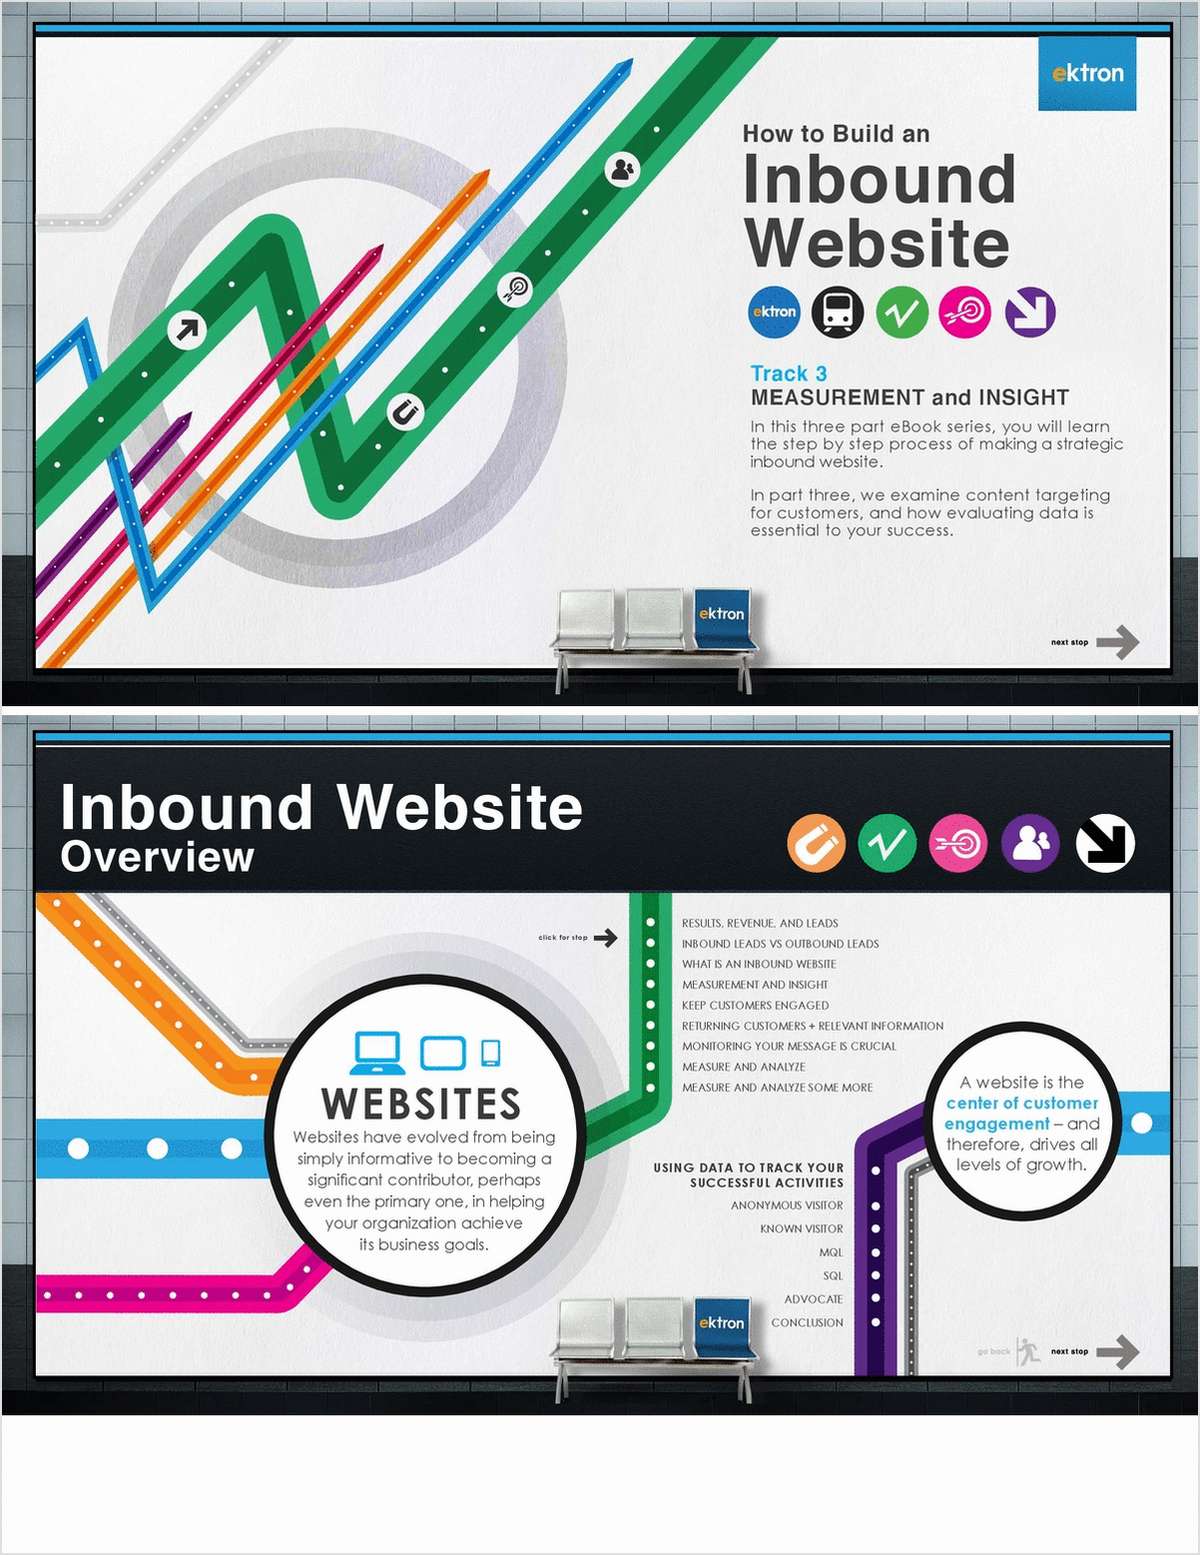 How to Build an Inbound Website: Measurement & Insight